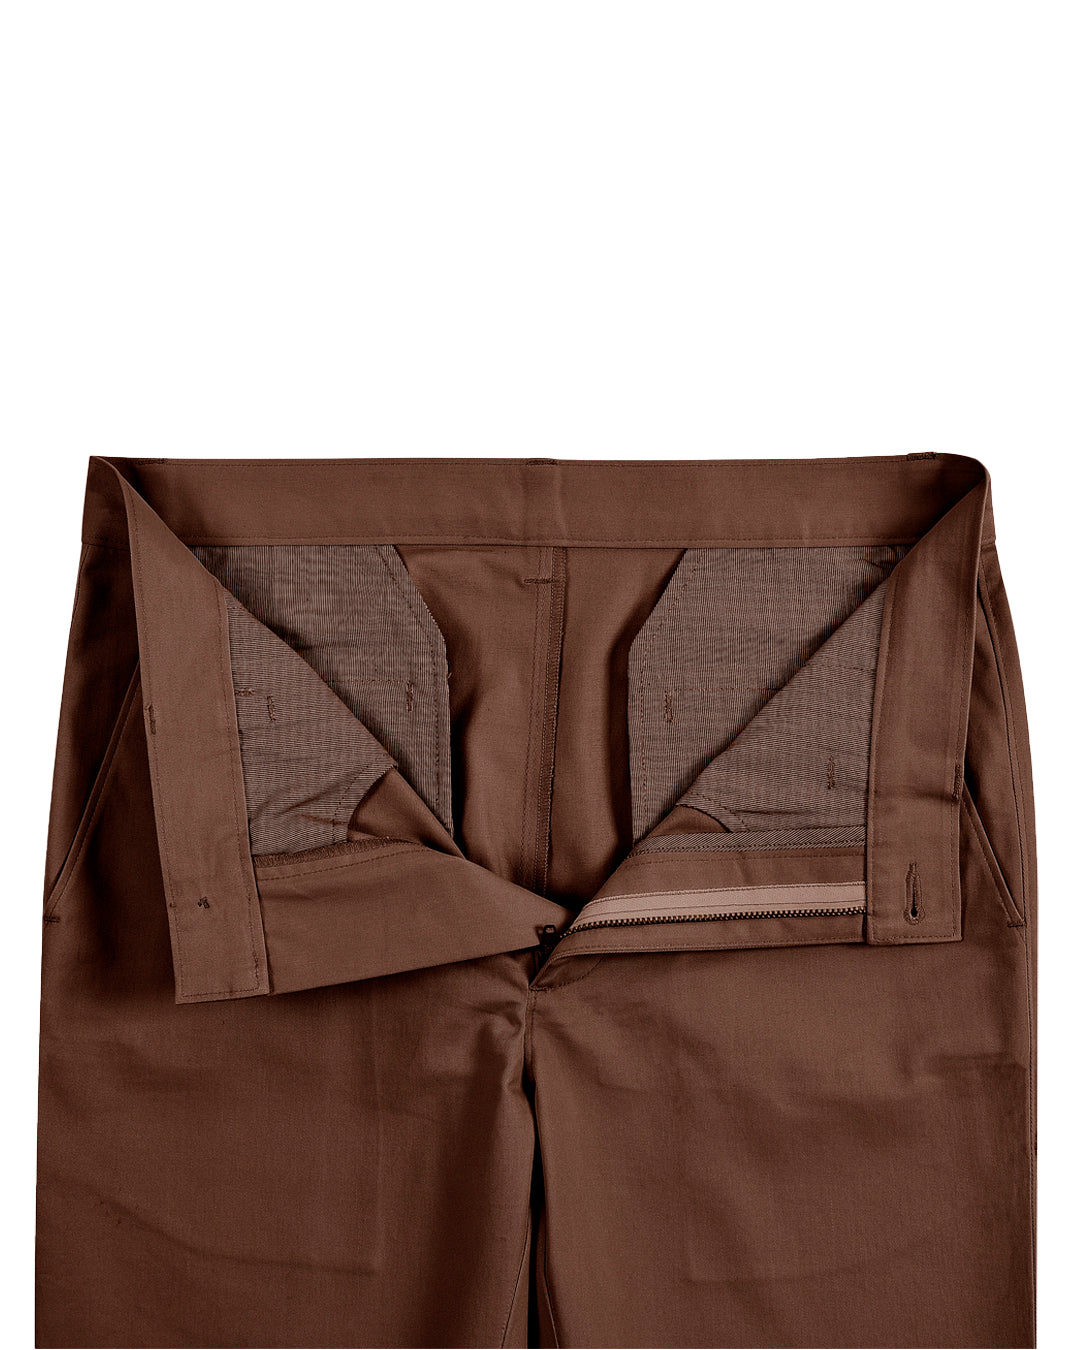 Open front view of custom Genoa Chino pants for men by Luxire in chestnut brown